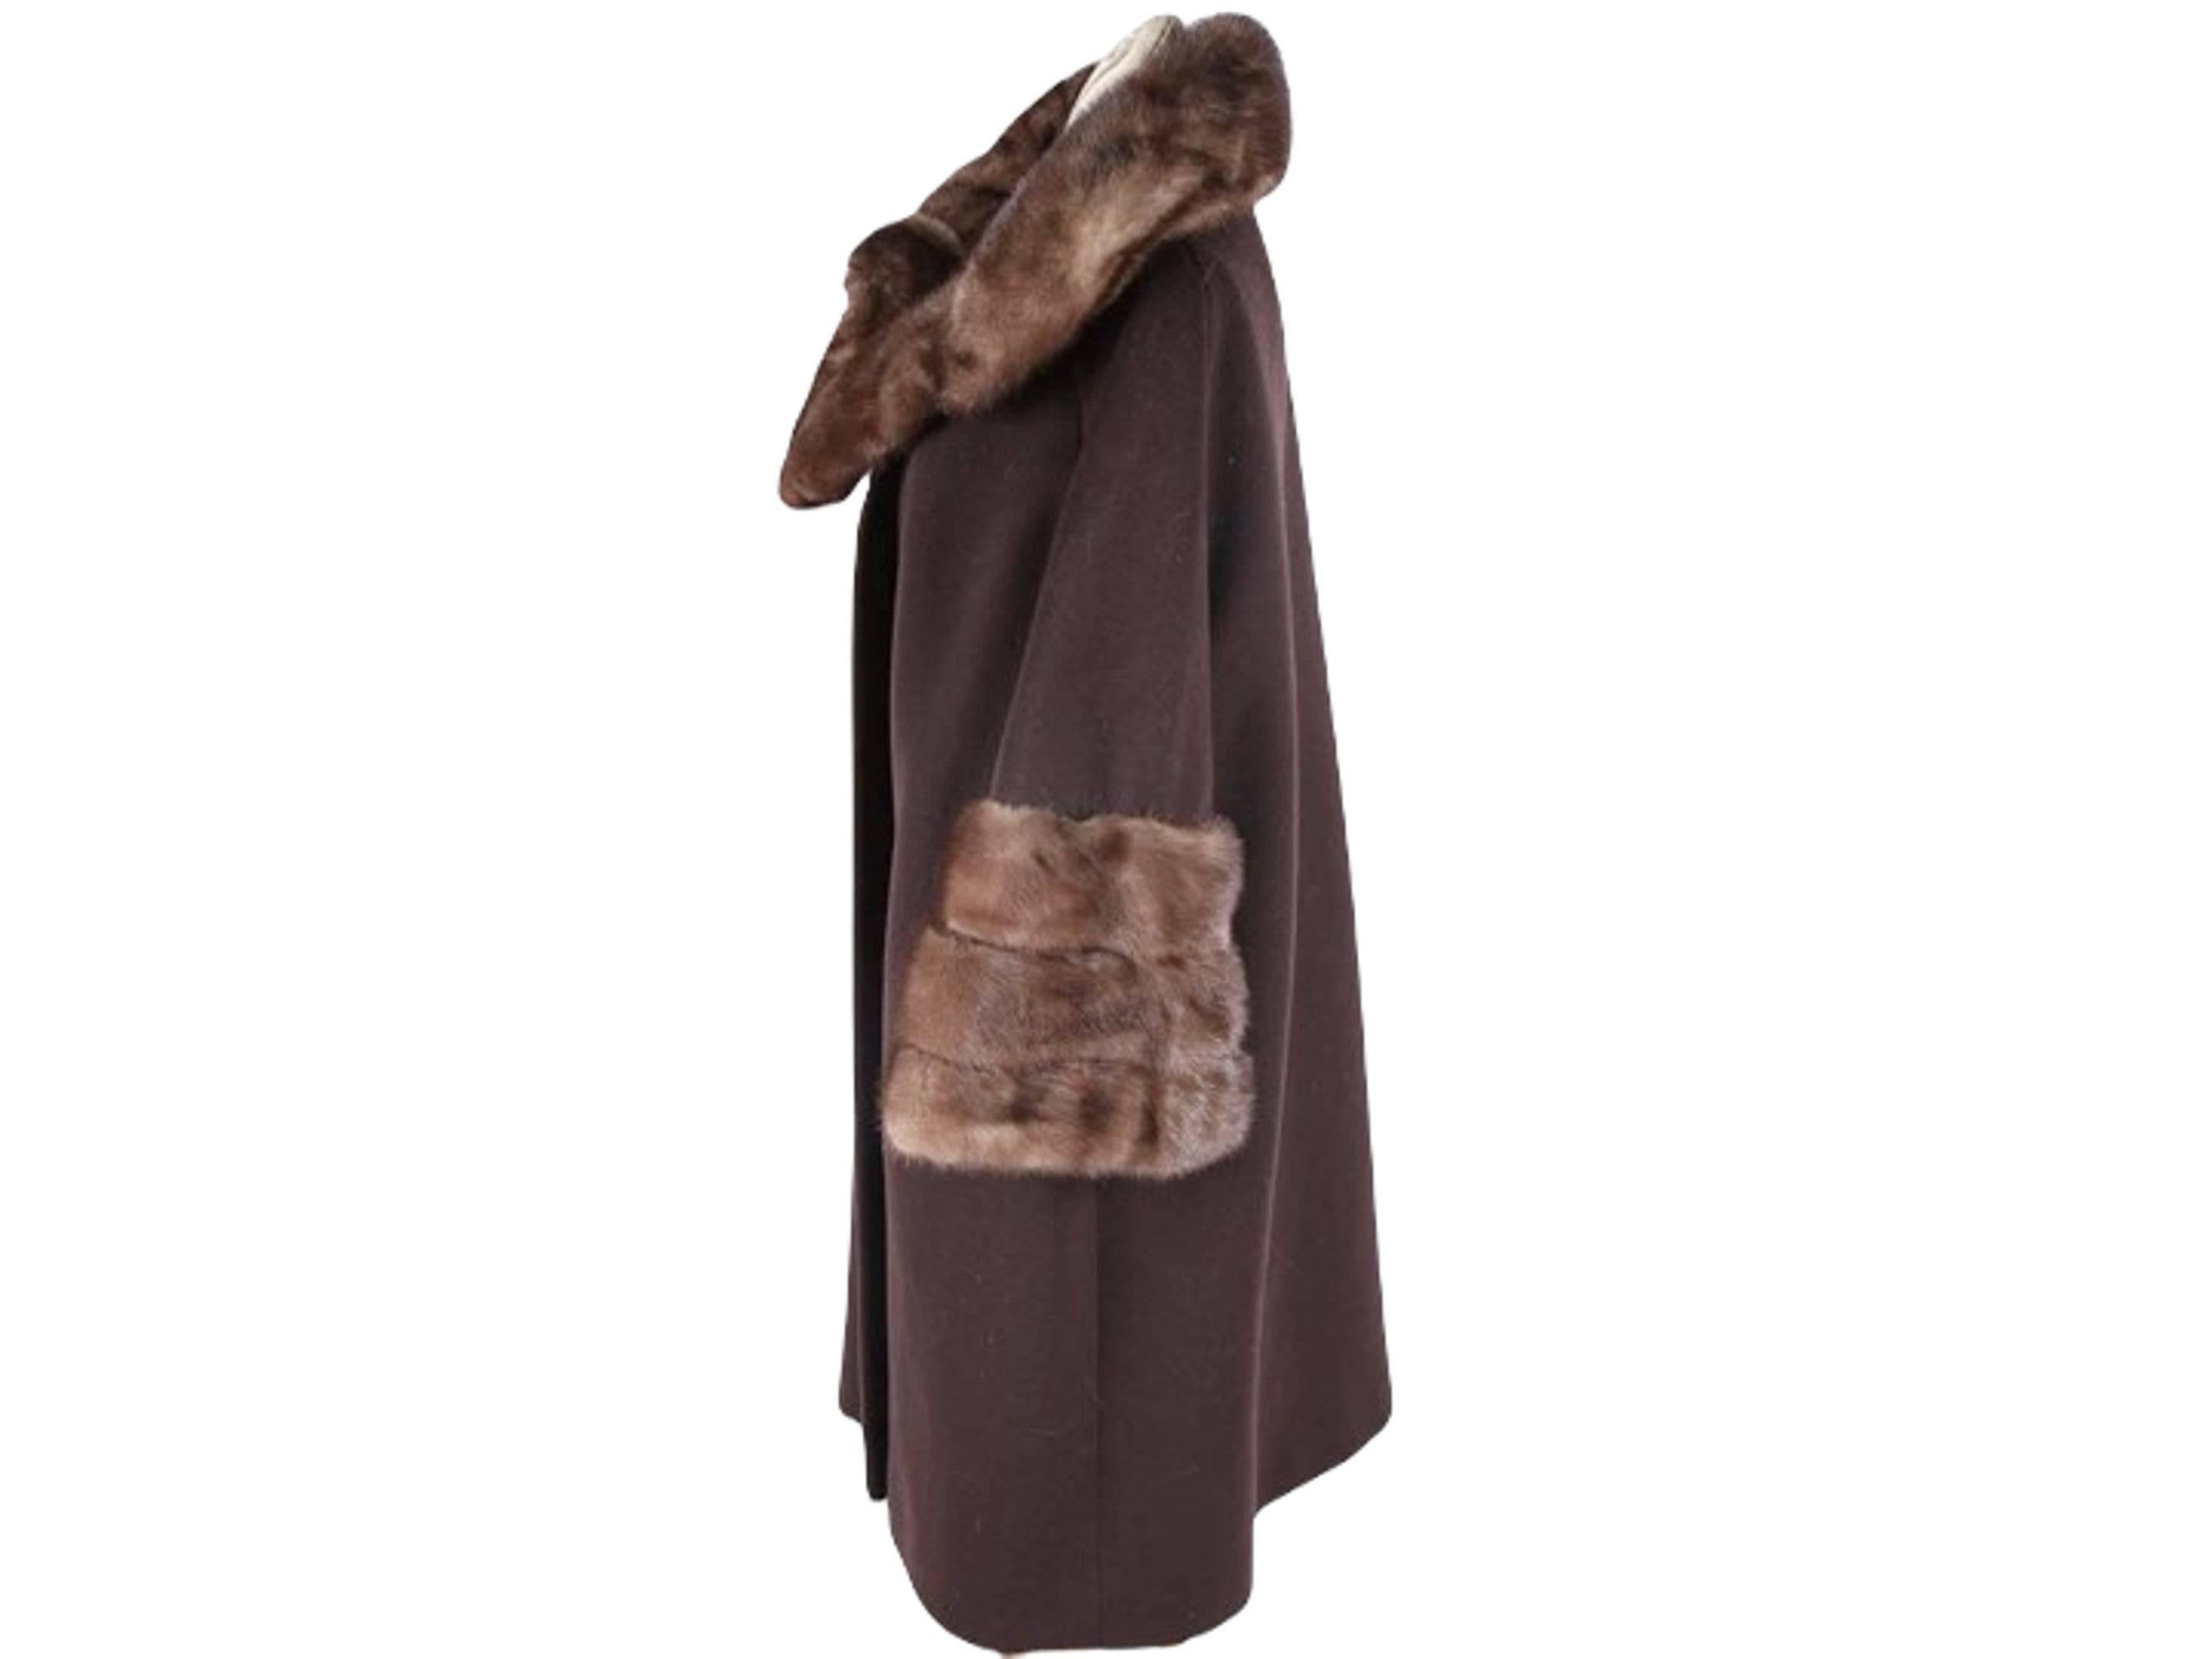 This coat is simply amazing - an exquisite Blin + Blin custom couture wool and mink fur coat circa the 1950s. The luxurious mink fur accents and highest quality tailoring make this piece a truly elegant choice for the colder months. The coat is